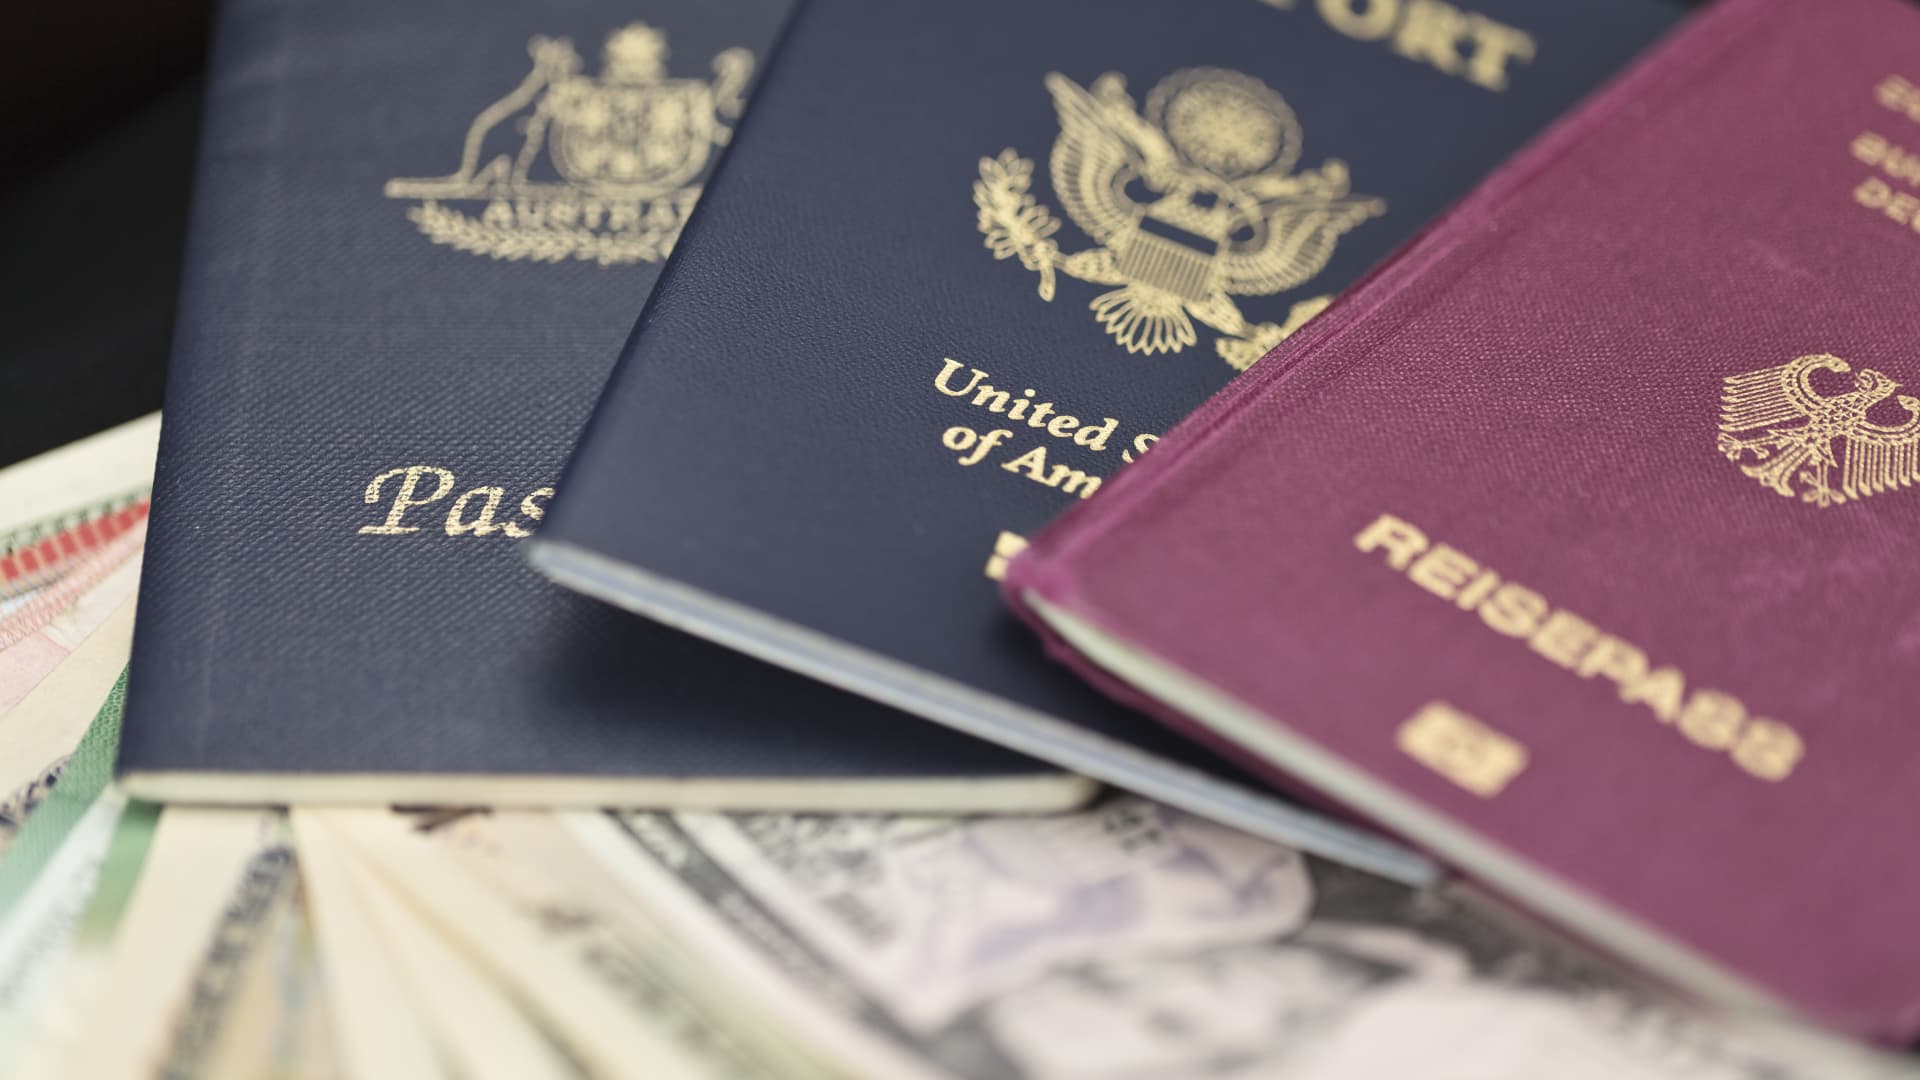 Wealthy Americans get second passports, citing risk of instability